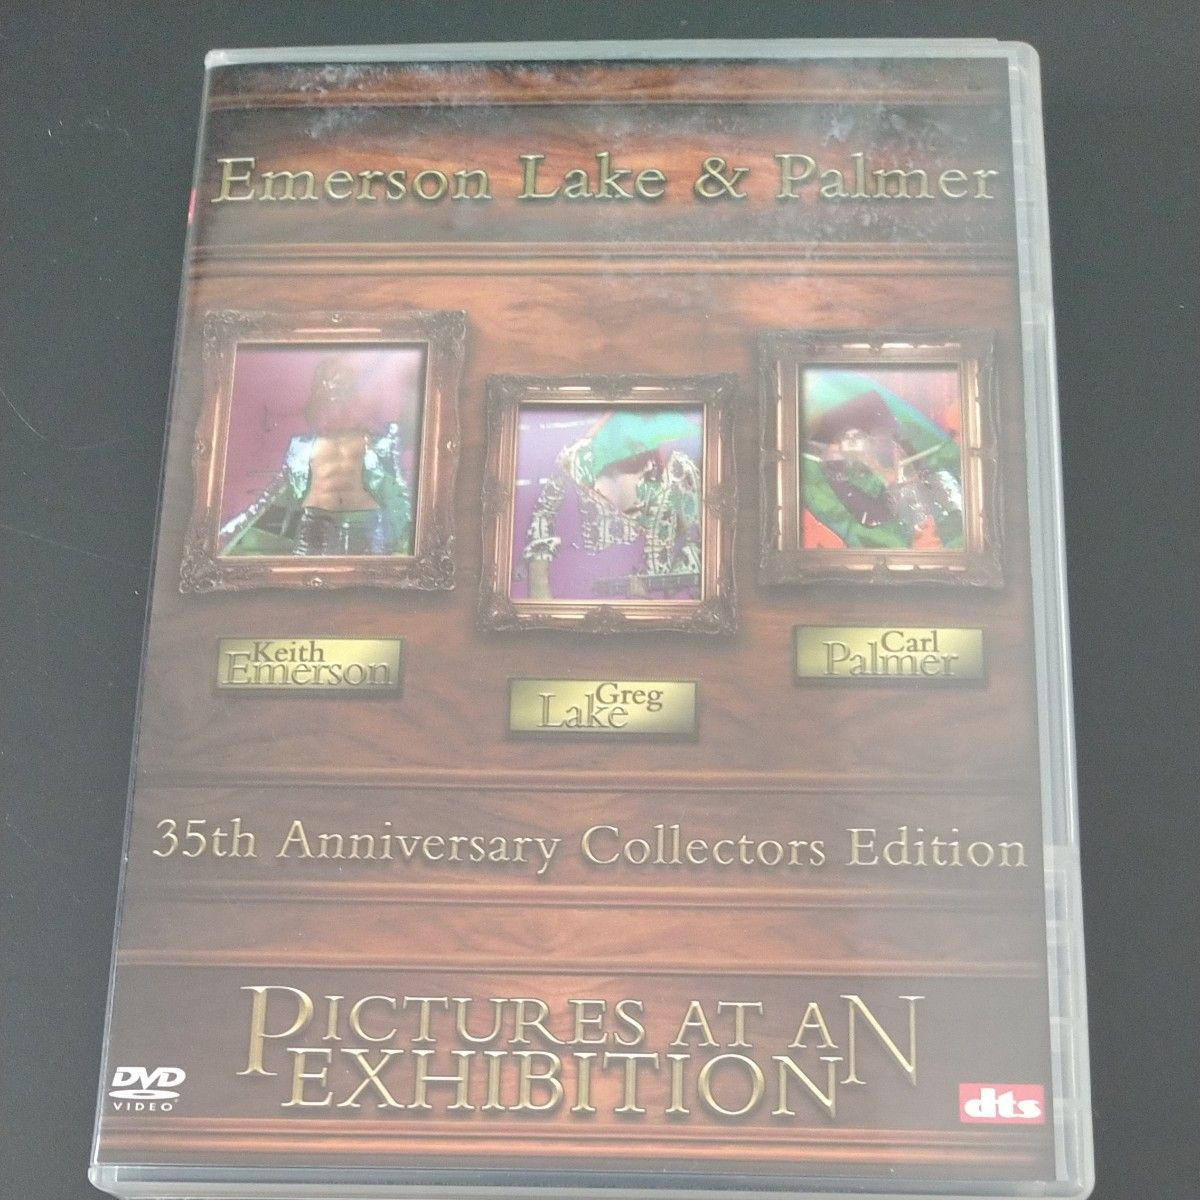 EMERSON LAKE ＆ PALMER PICTURE AT AN EXHBITION 輸入盤 DVD 35周年記念盤